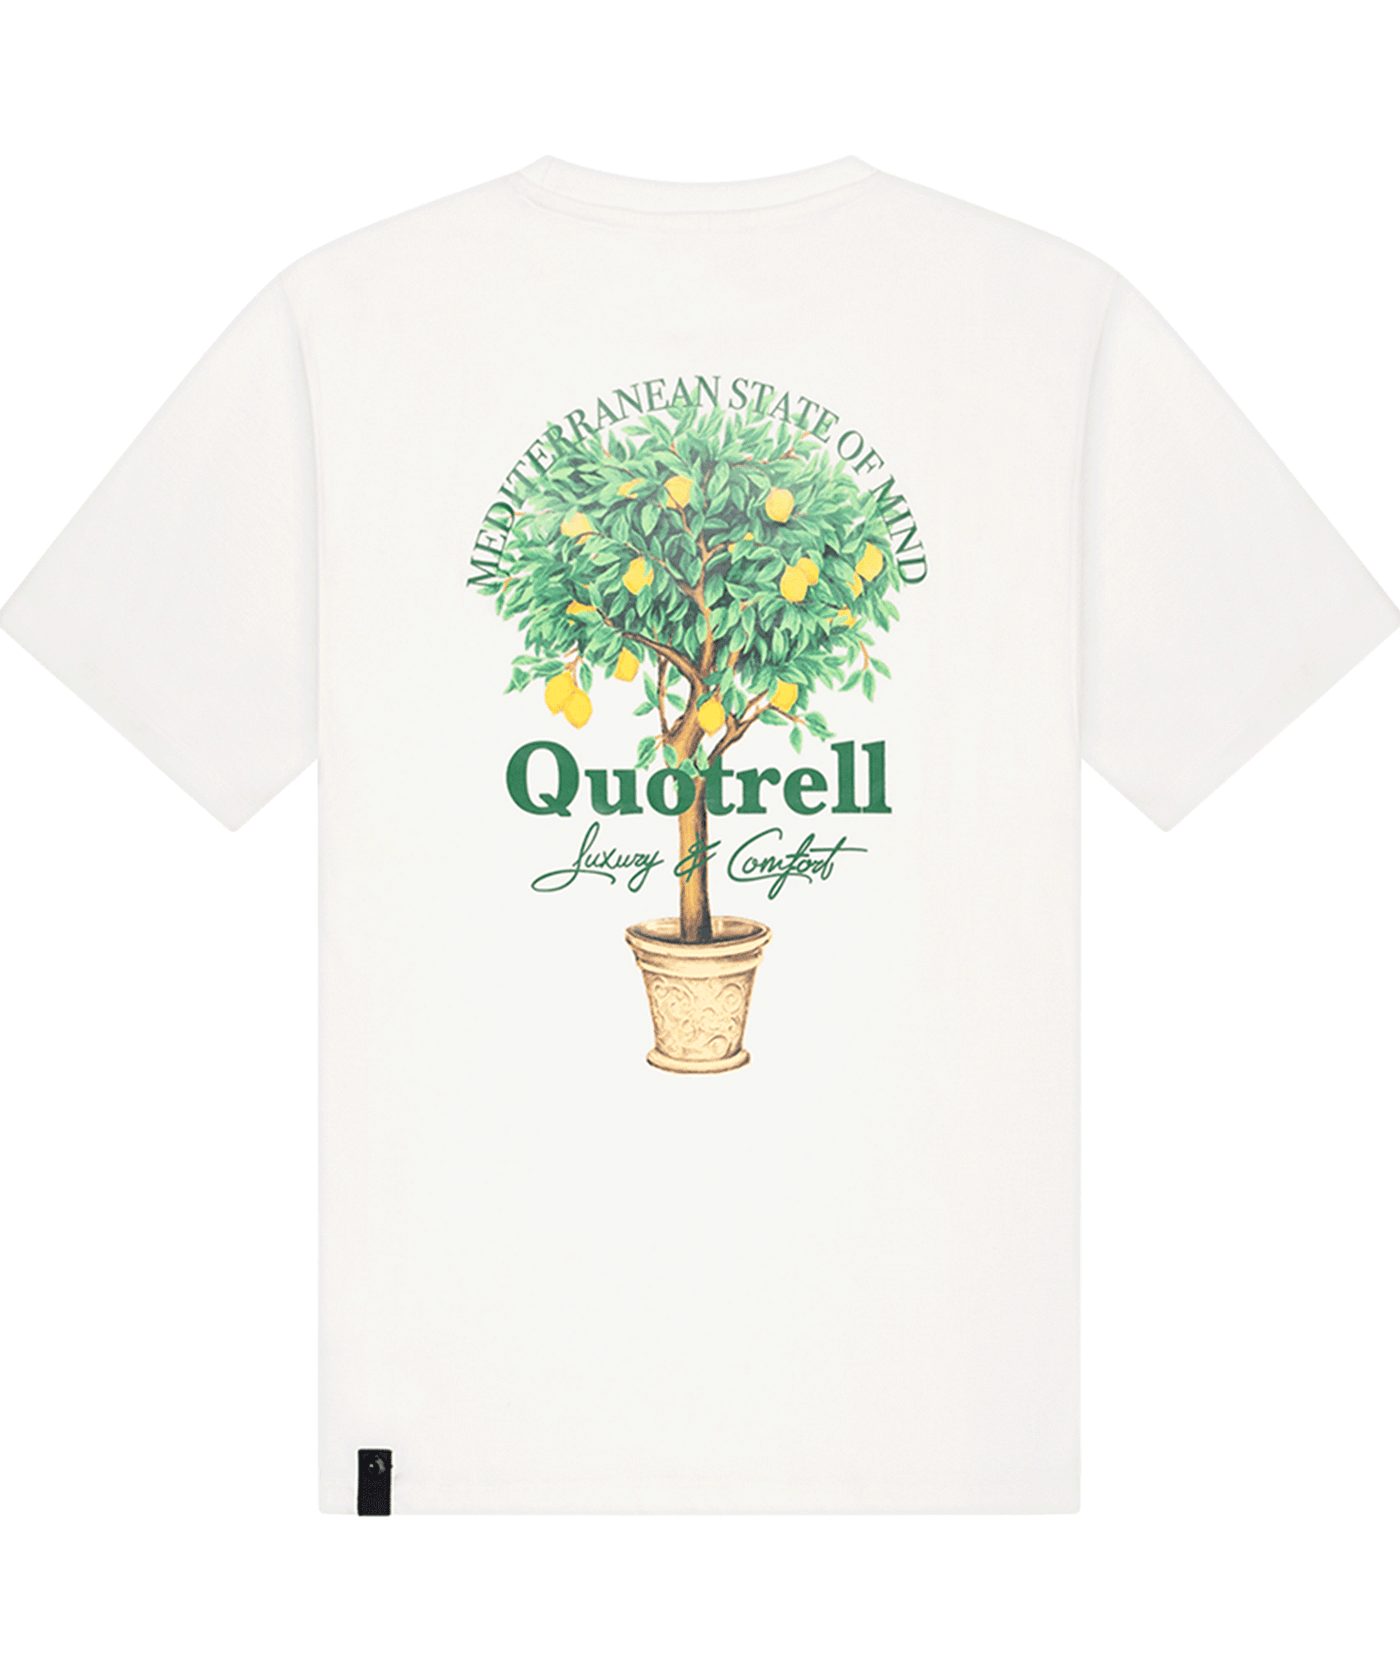 Quotrell - Limone - T-shirt - White/green